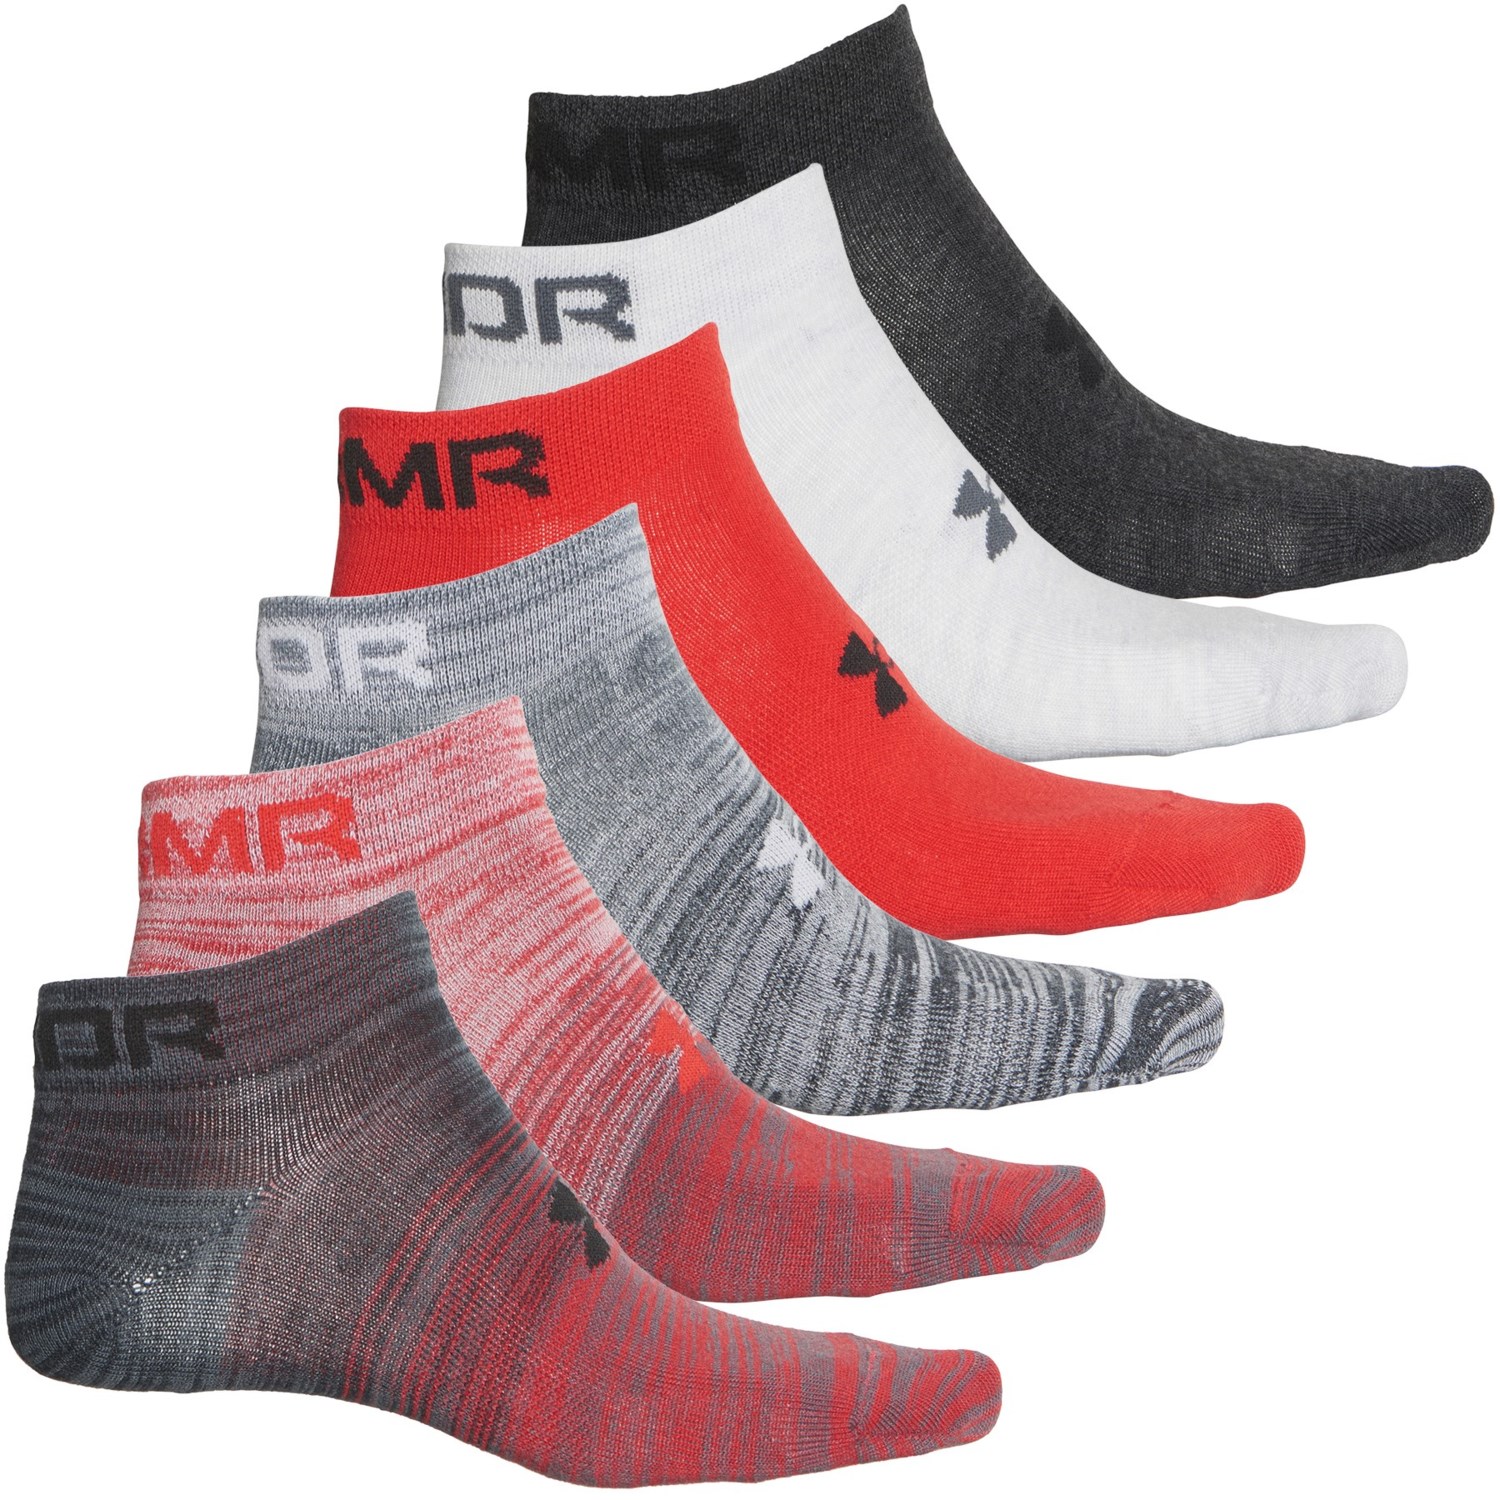 Under Armour Essential Lite Low-Cut Socks - 6-Pack, Below the Ankle (For Men)